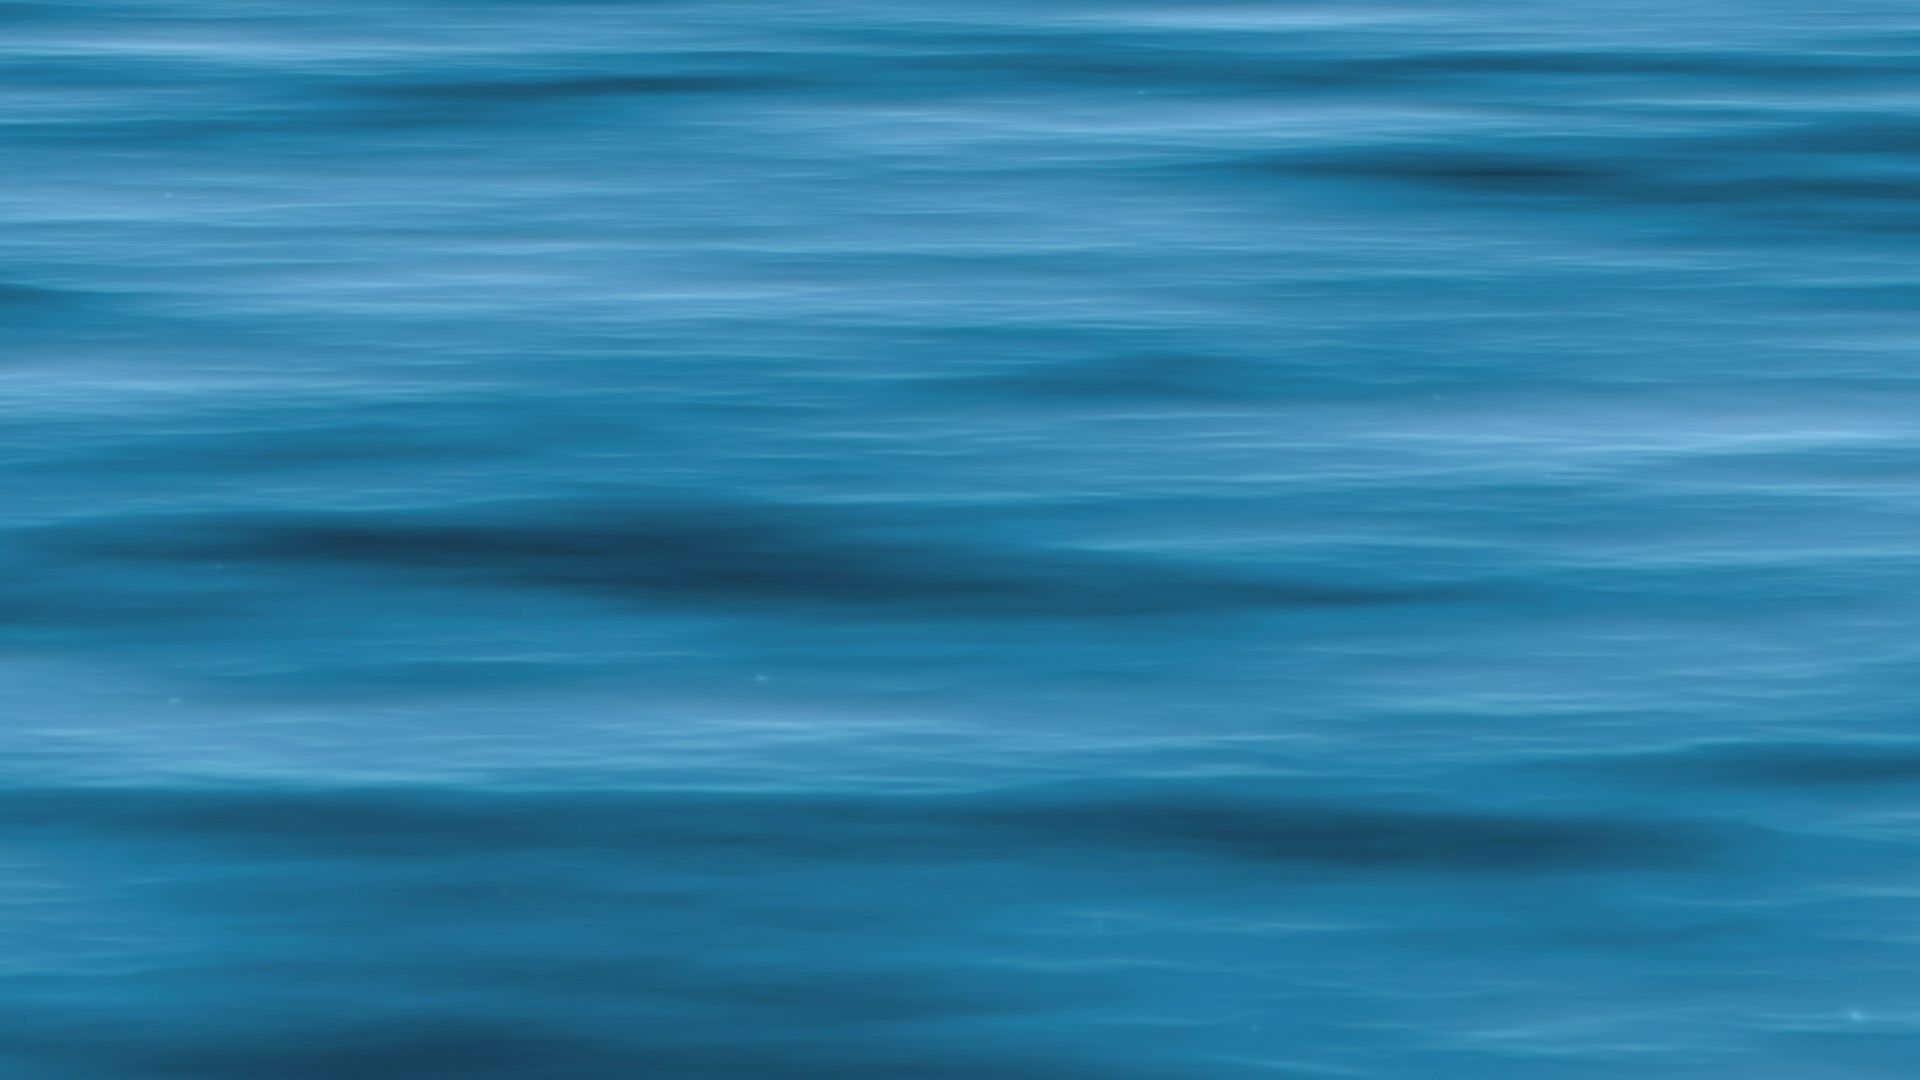 Calm Water 1 | downloops – Creative Motion Backgrounds